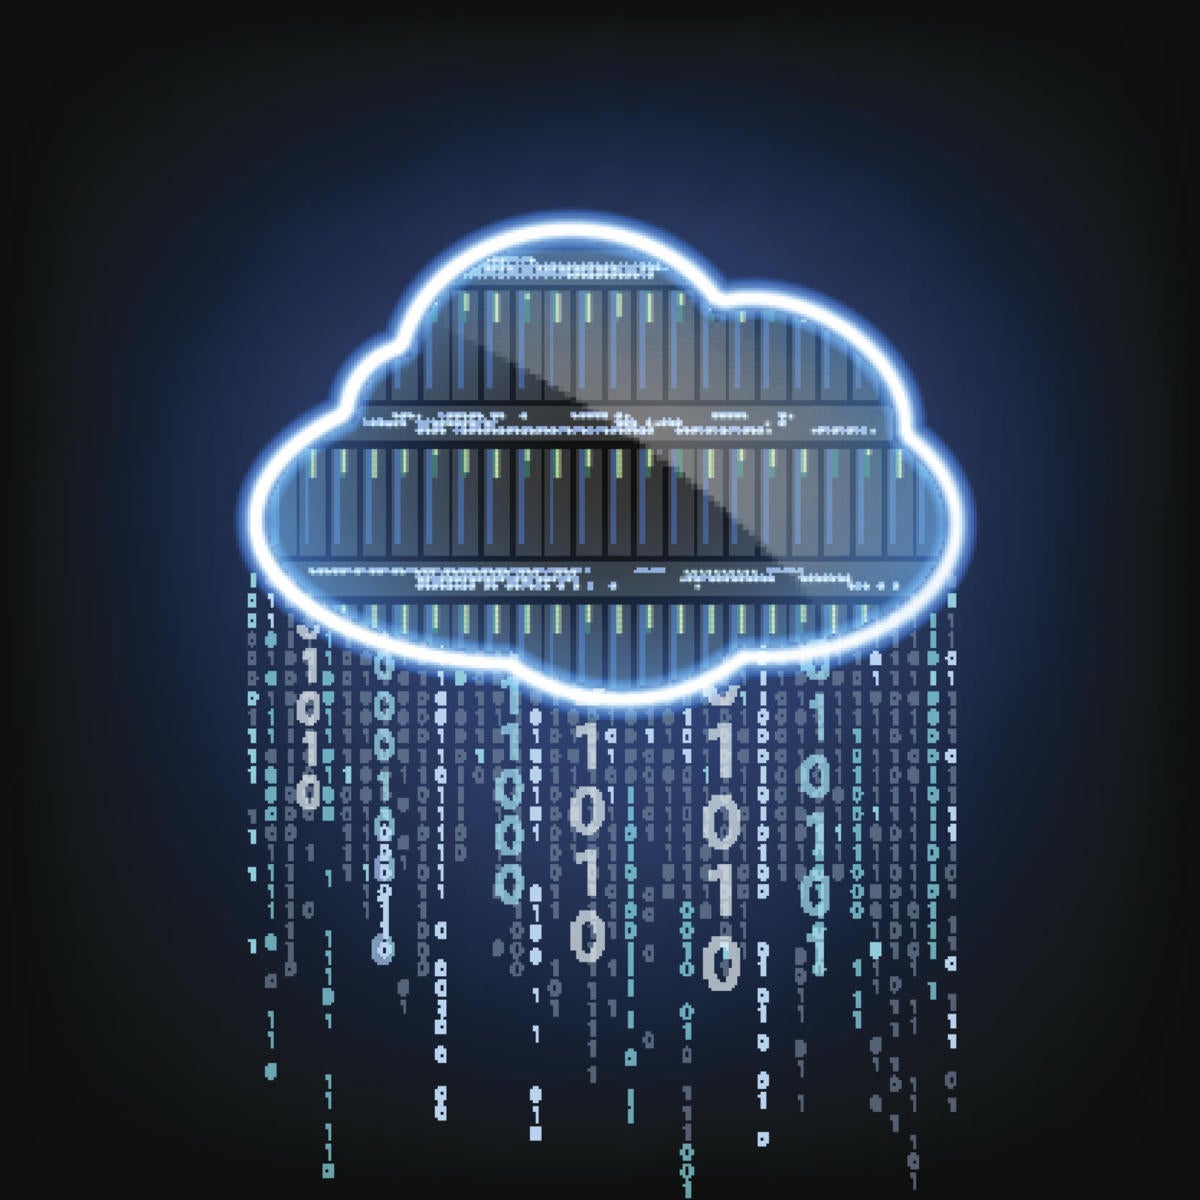 How to get the most out of data, services in a multi-cloud world